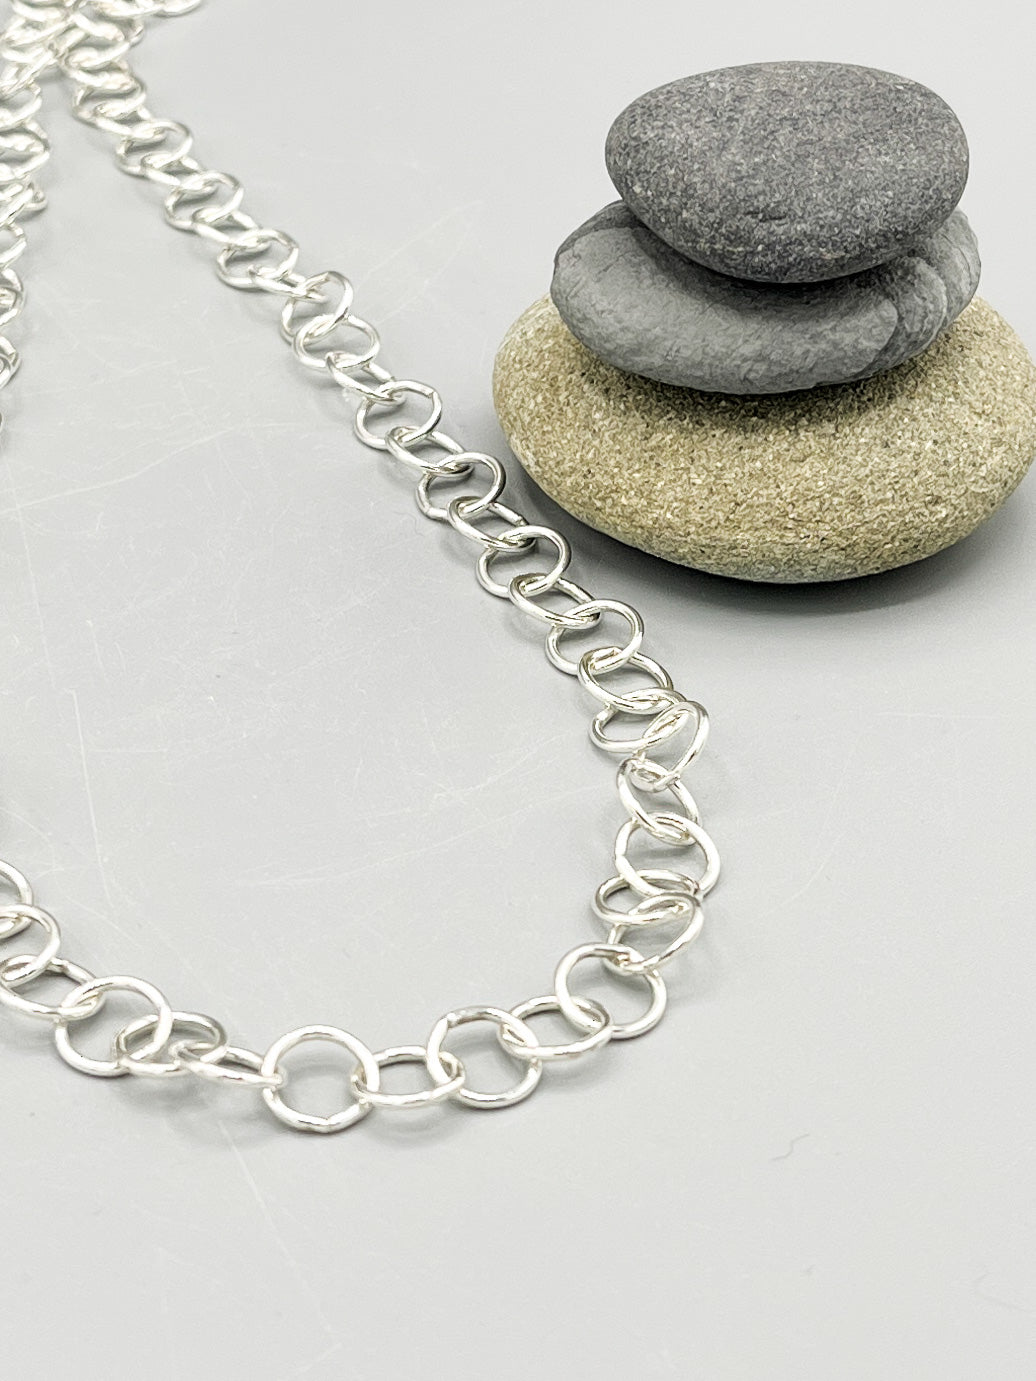 Sterling Silver Necklace. 36” loose round cable link with lobster claw clasp